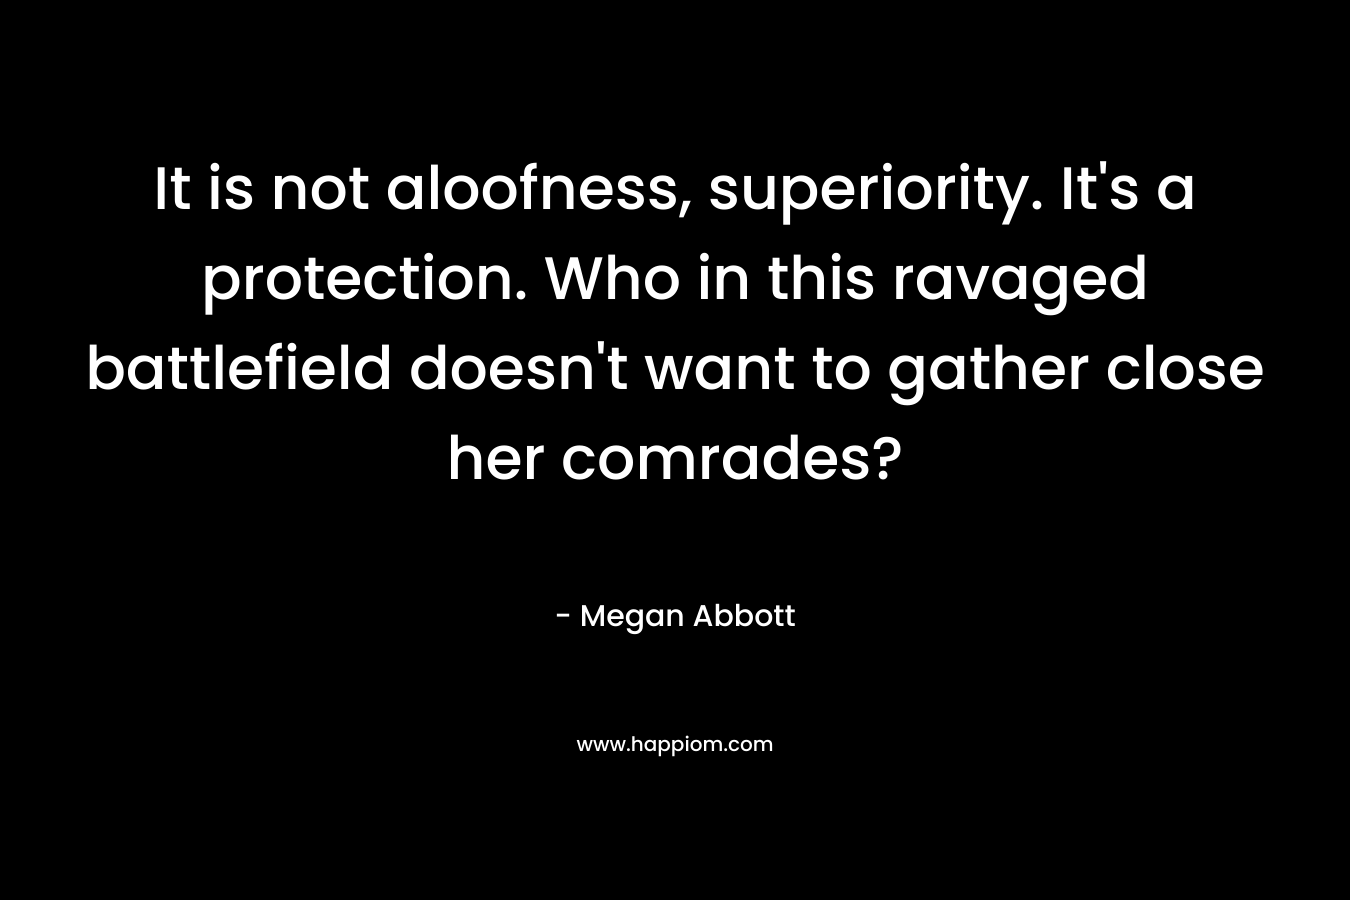 It is not aloofness, superiority. It’s a protection. Who in this ravaged battlefield doesn’t want to gather close her comrades? – Megan Abbott